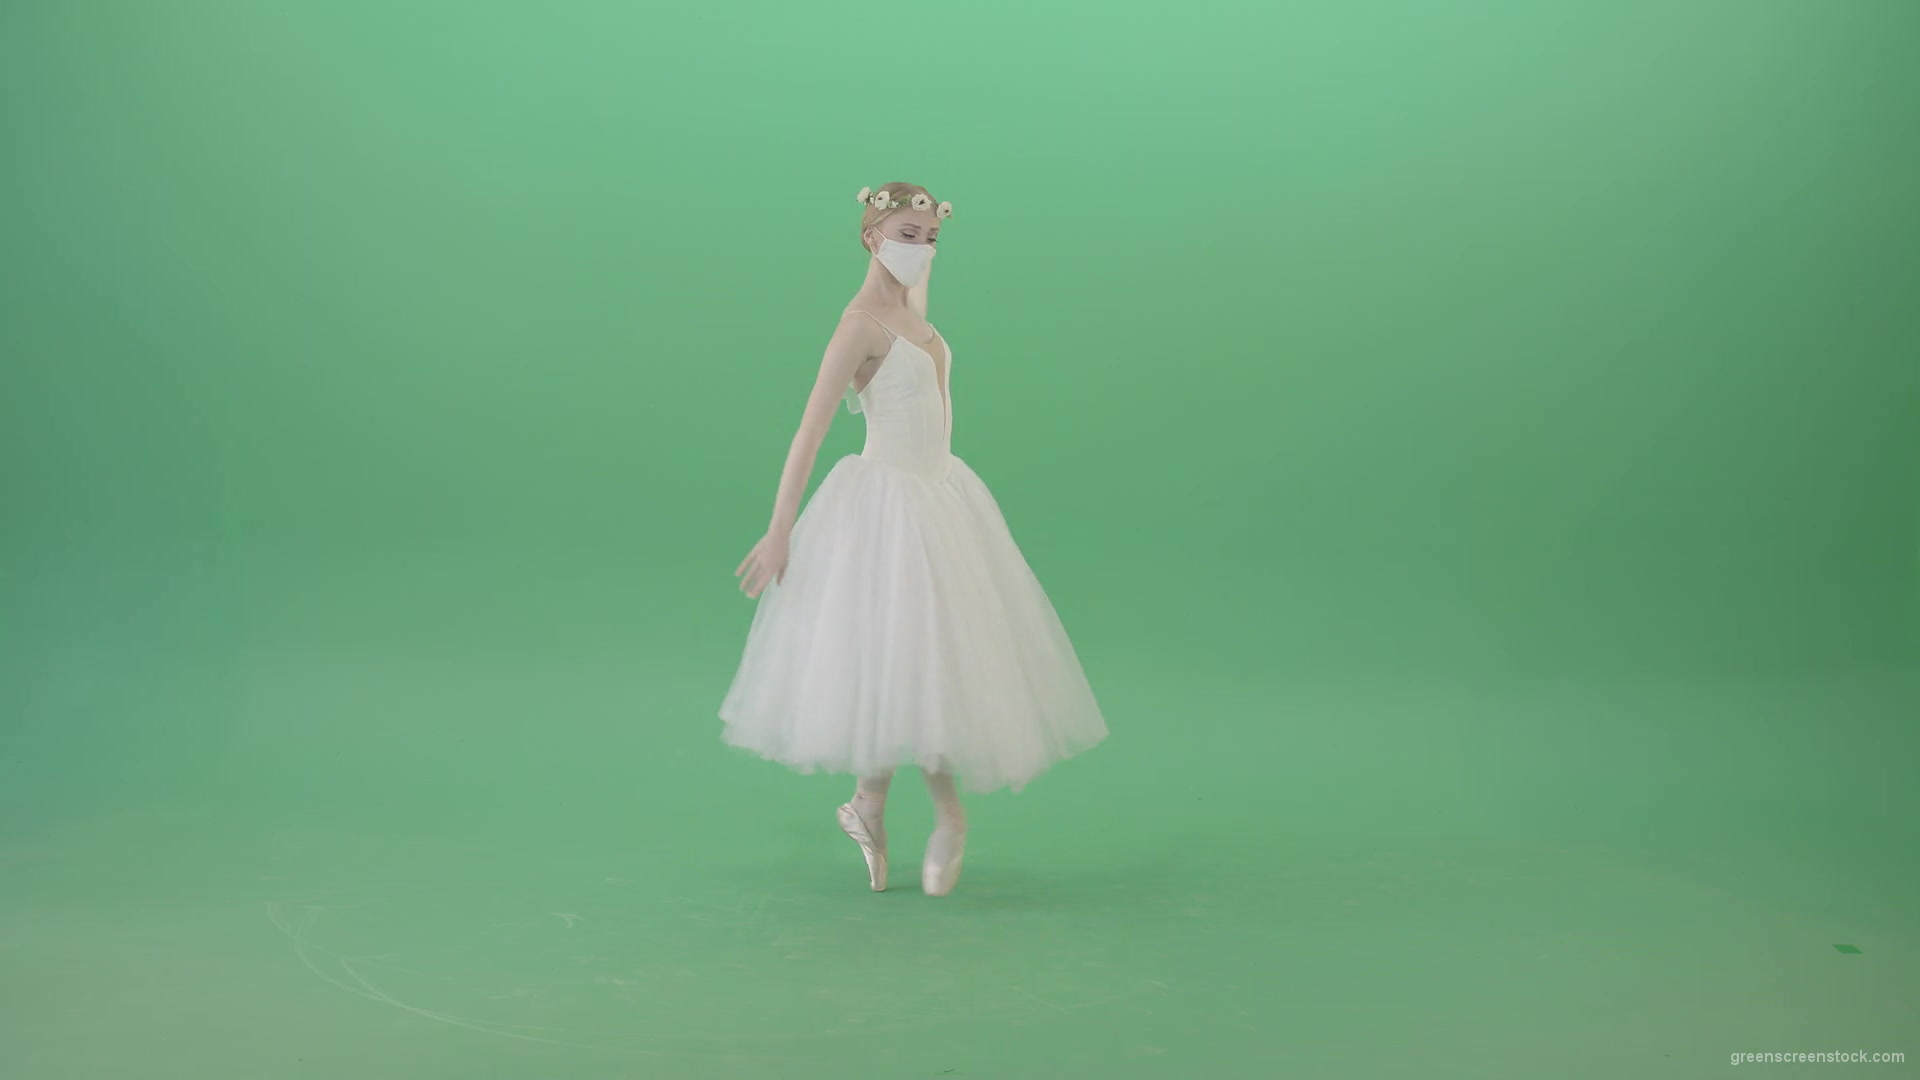 Ballet-Dance-young-woman-welcome-Corona-Virus-dancing-in-mask-isolated-on-green-screen-4K-Video-Footage-1920_007 Green Screen Stock